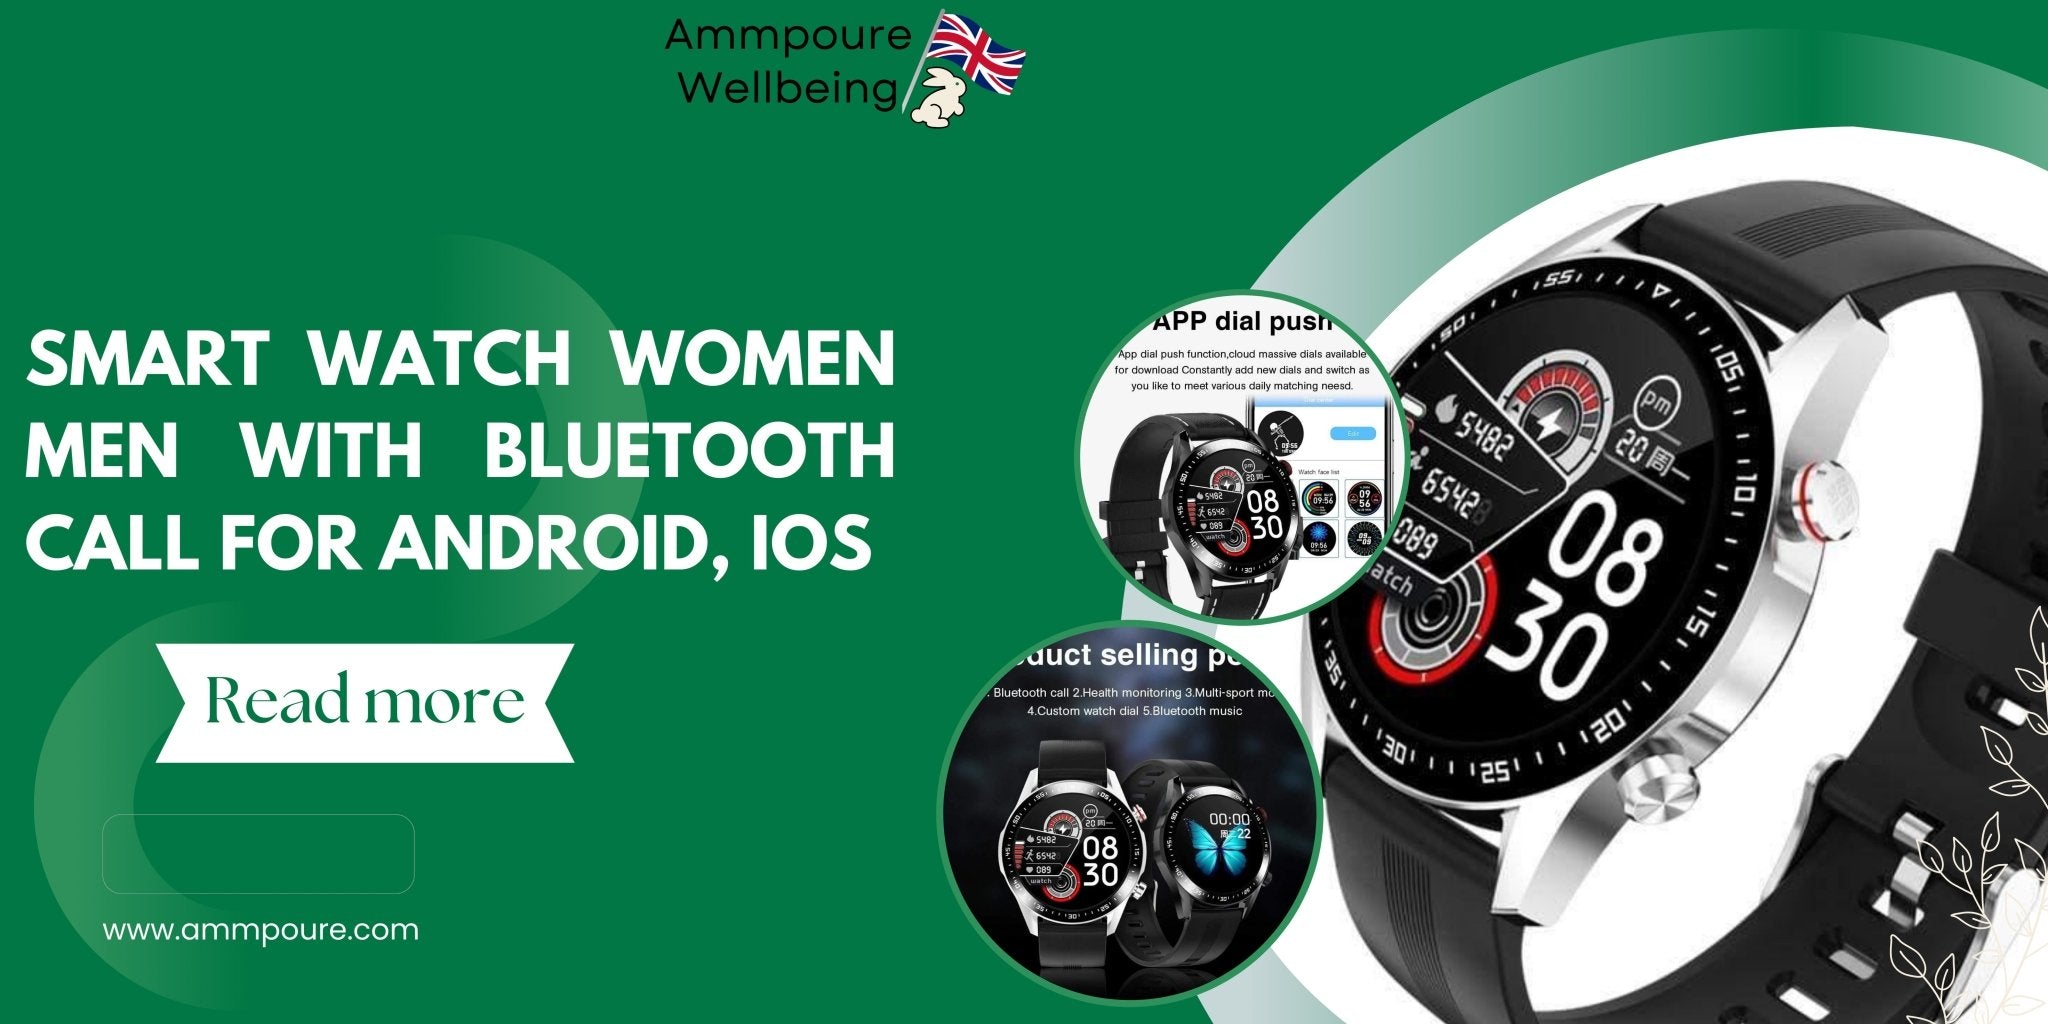 Stay Connected and Stylish: The Smart Watch Women Men with Bluetooth Call for Android and iOS - Ammpoure Wellbeing